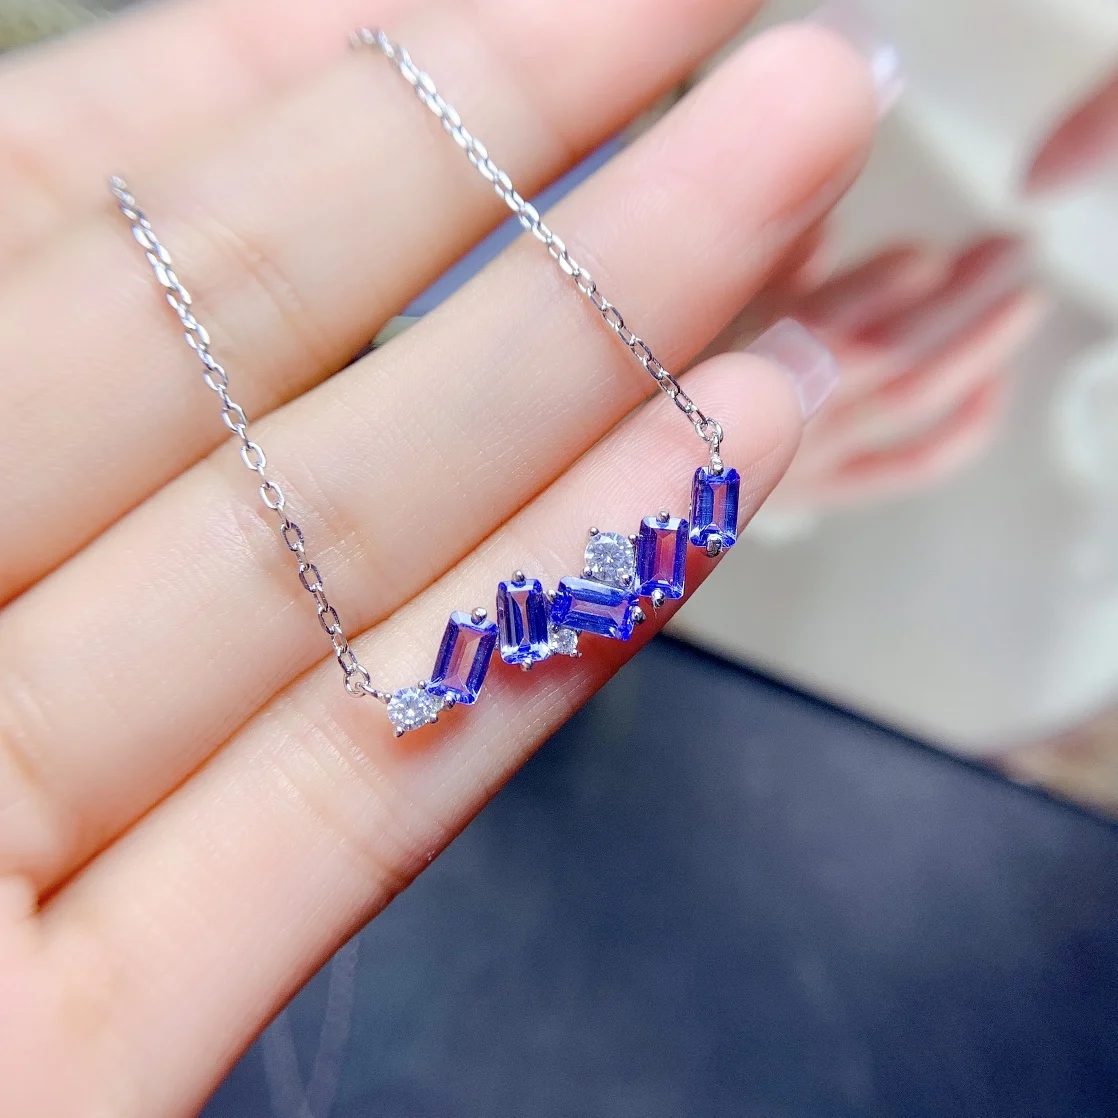 Natural Tanzanite necklace chain row, 3x5mm square gemstone, 925 sterling silver setting, fashionable holiday gift for women